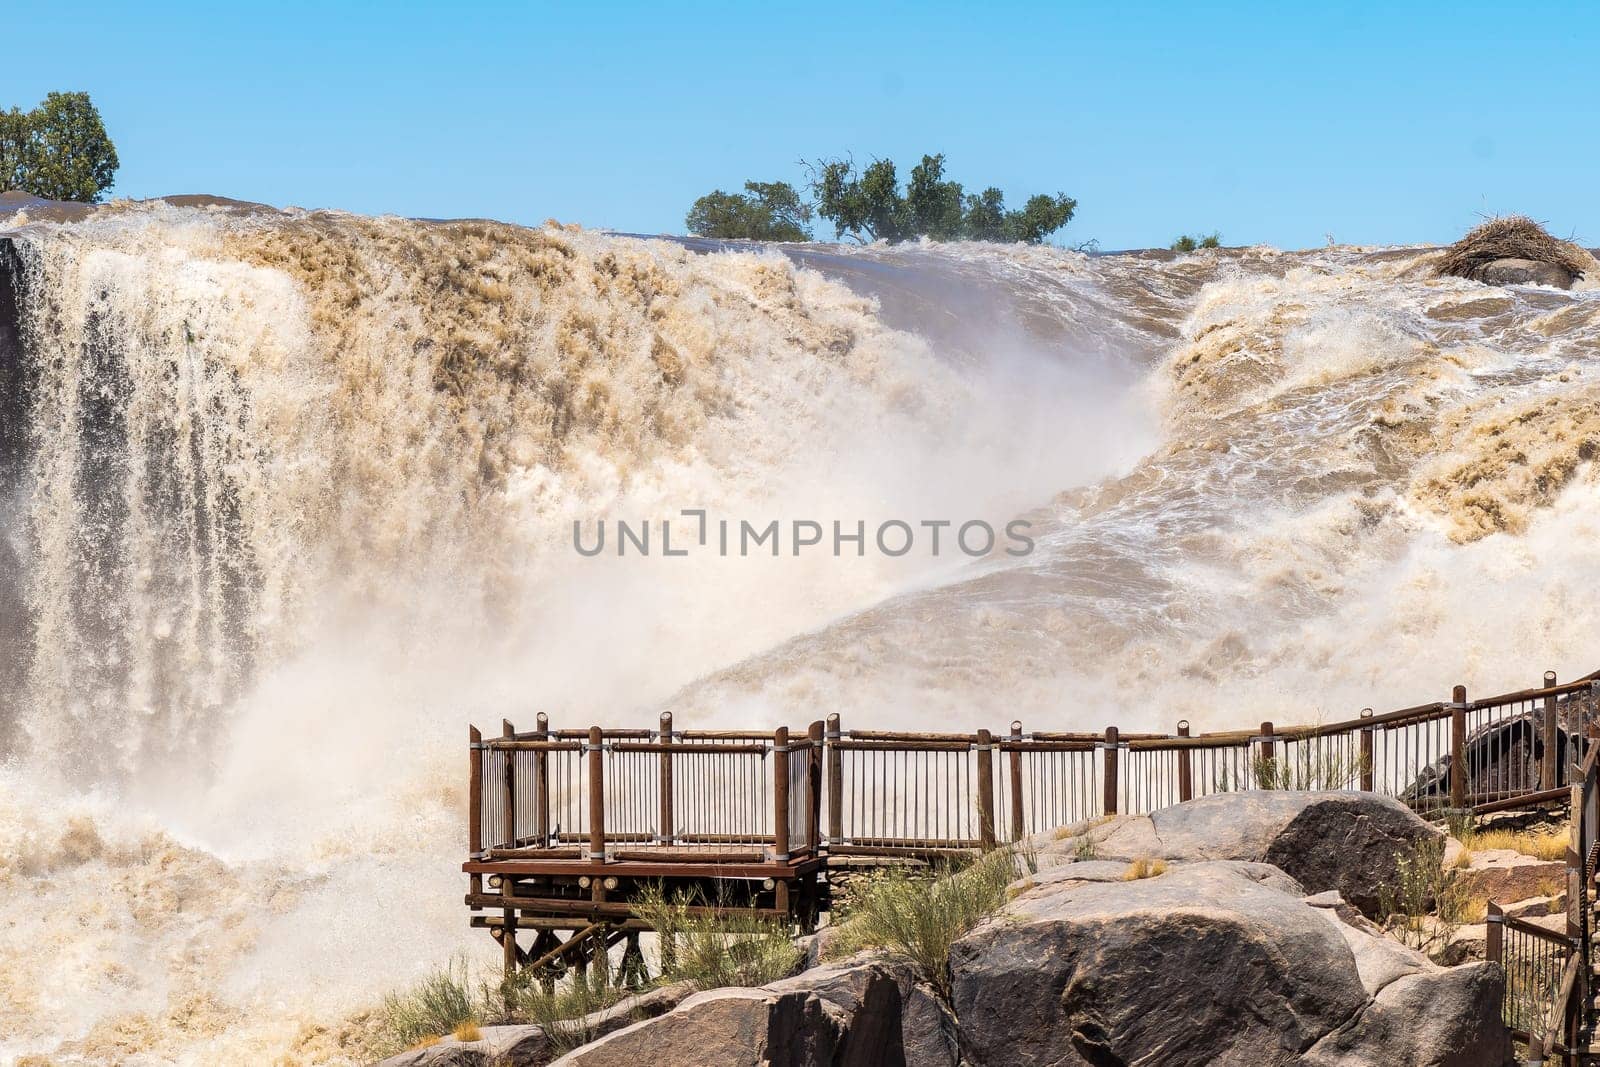 Viewpoint at the main Augrabies waterfall in flooded Orange River by dpreezg